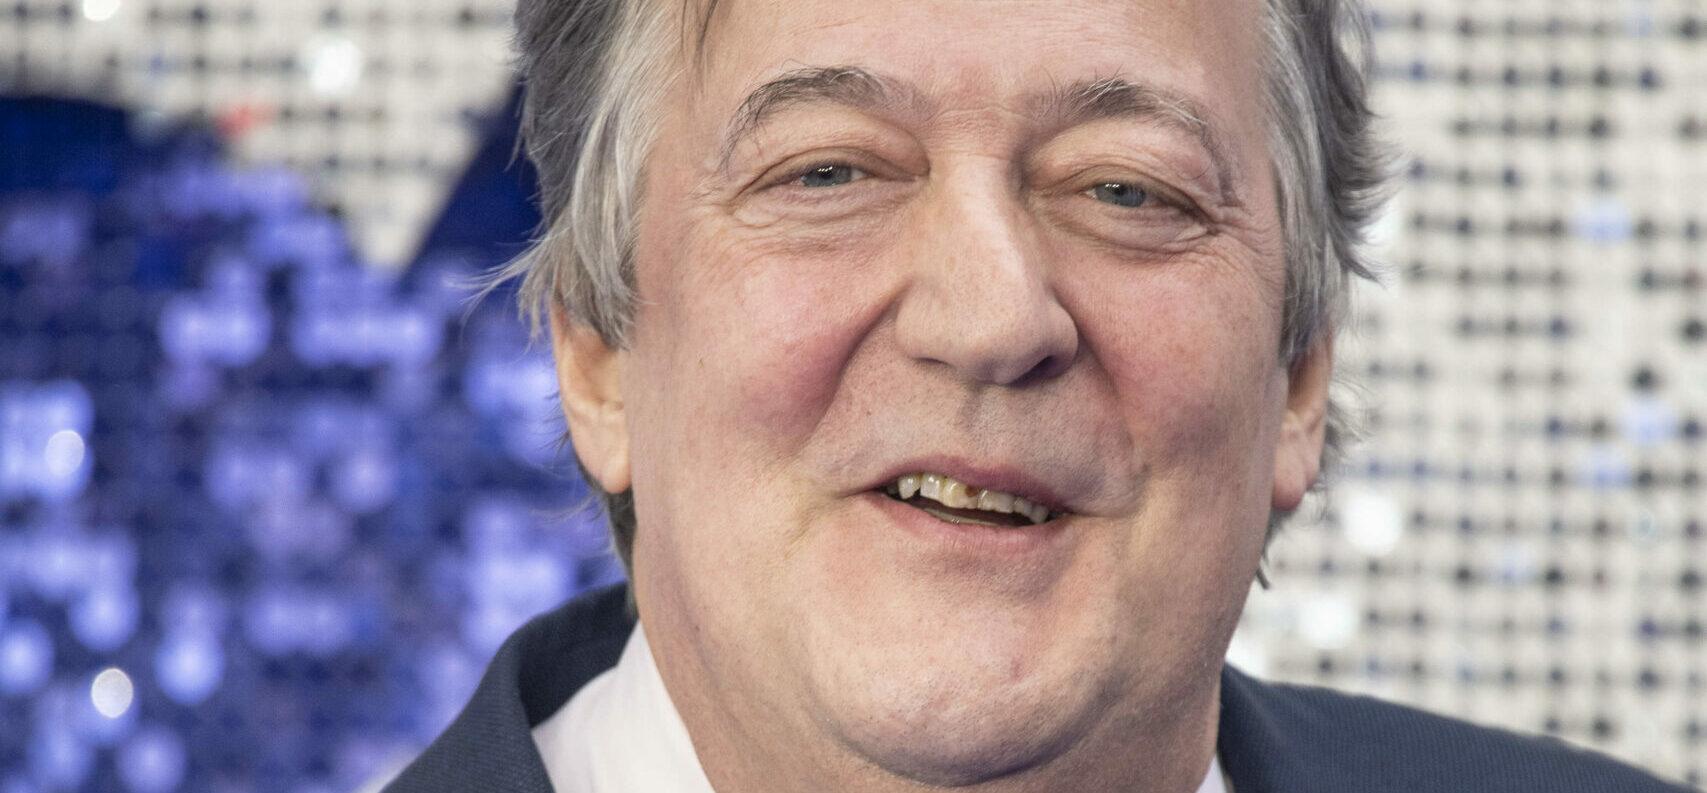 Stephen Fry To Host Rebooted Version Of ‘Jeopardy!’